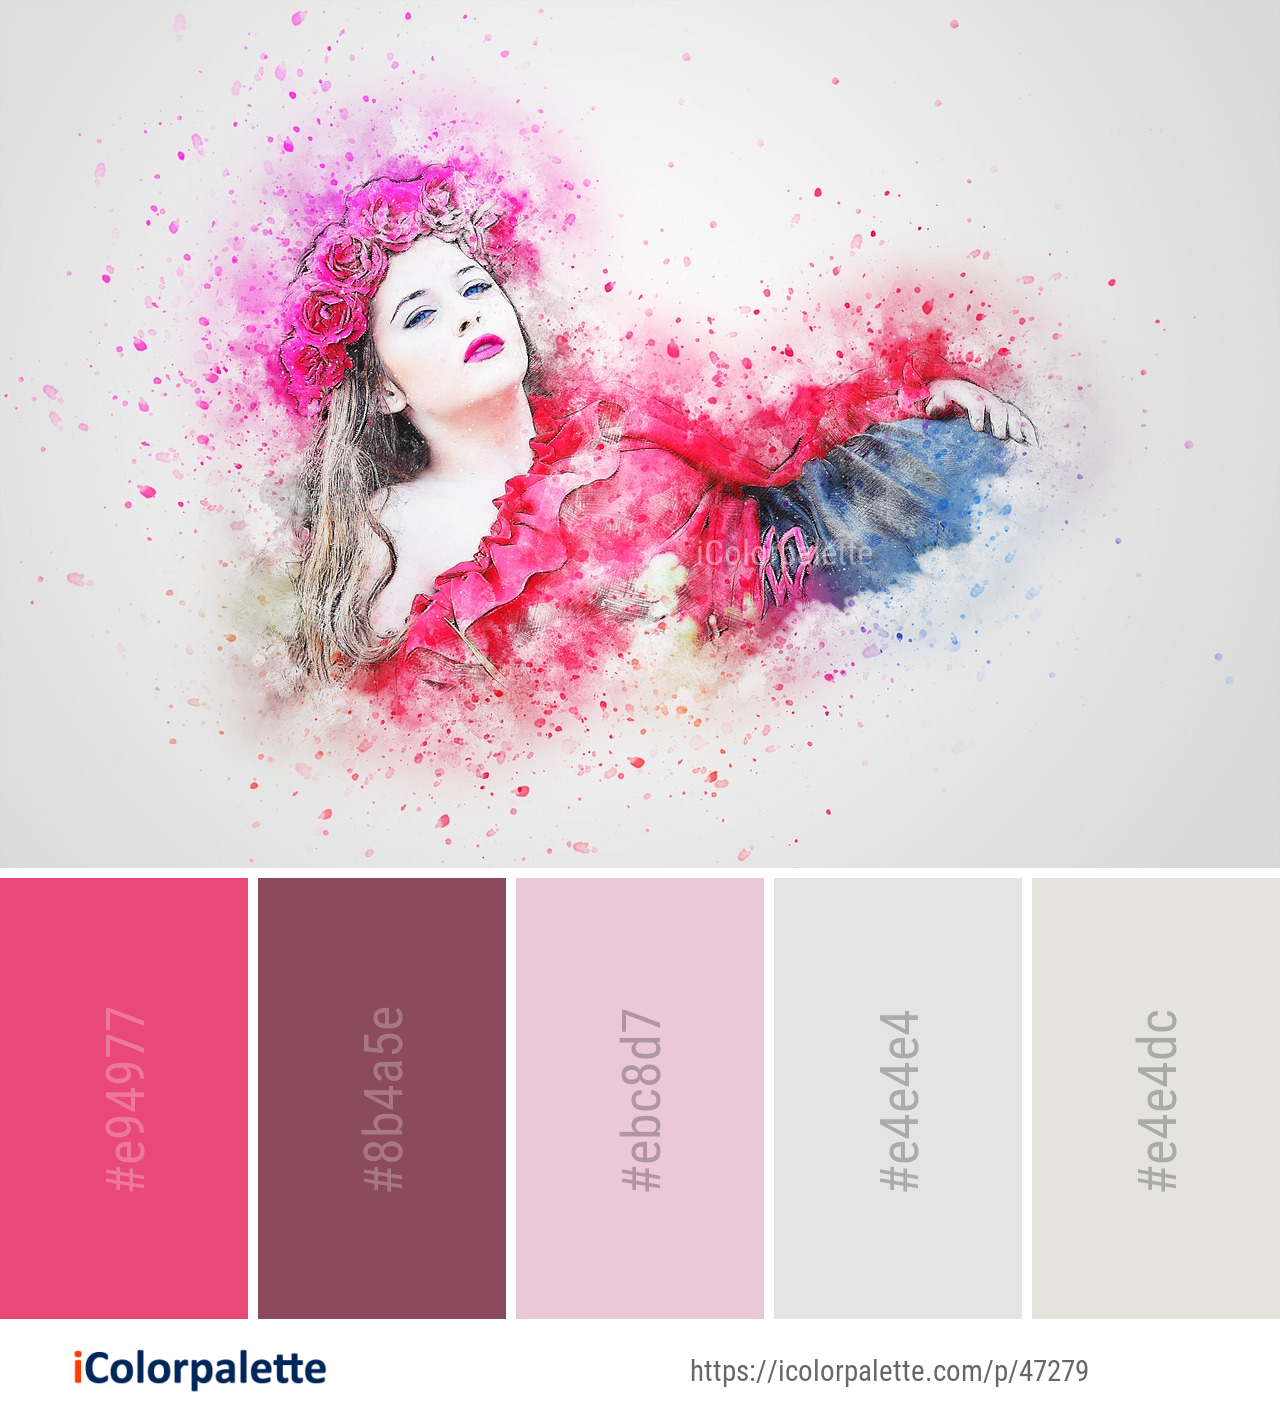 Color Palette Ideas from Pink Nose Beauty Image | iColorpalette